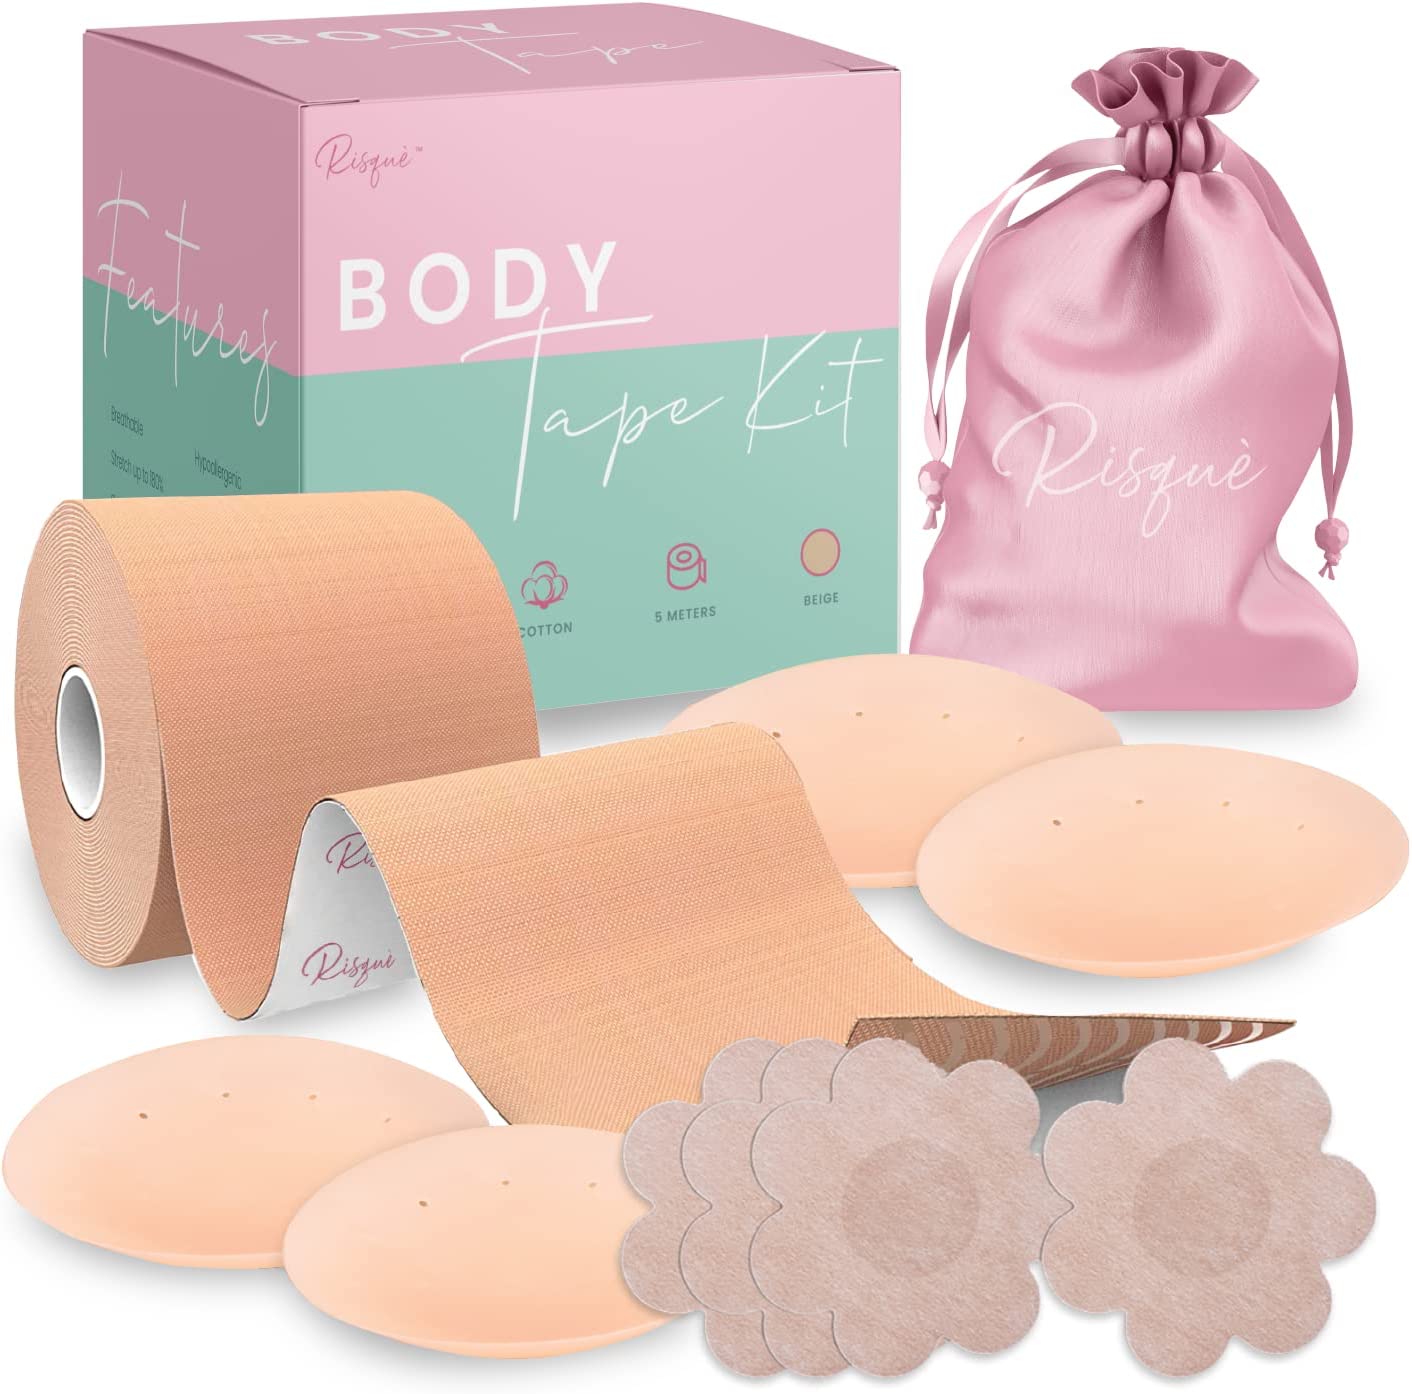 Chest Support Boob Tape, Boobytape Kit | Achieve Chest Support Lift & Contour | Sticky Body Tape for Push up & Shape in All Clothing Fabric Dress Types | Waterproof Sweat-Proof Bob Tape